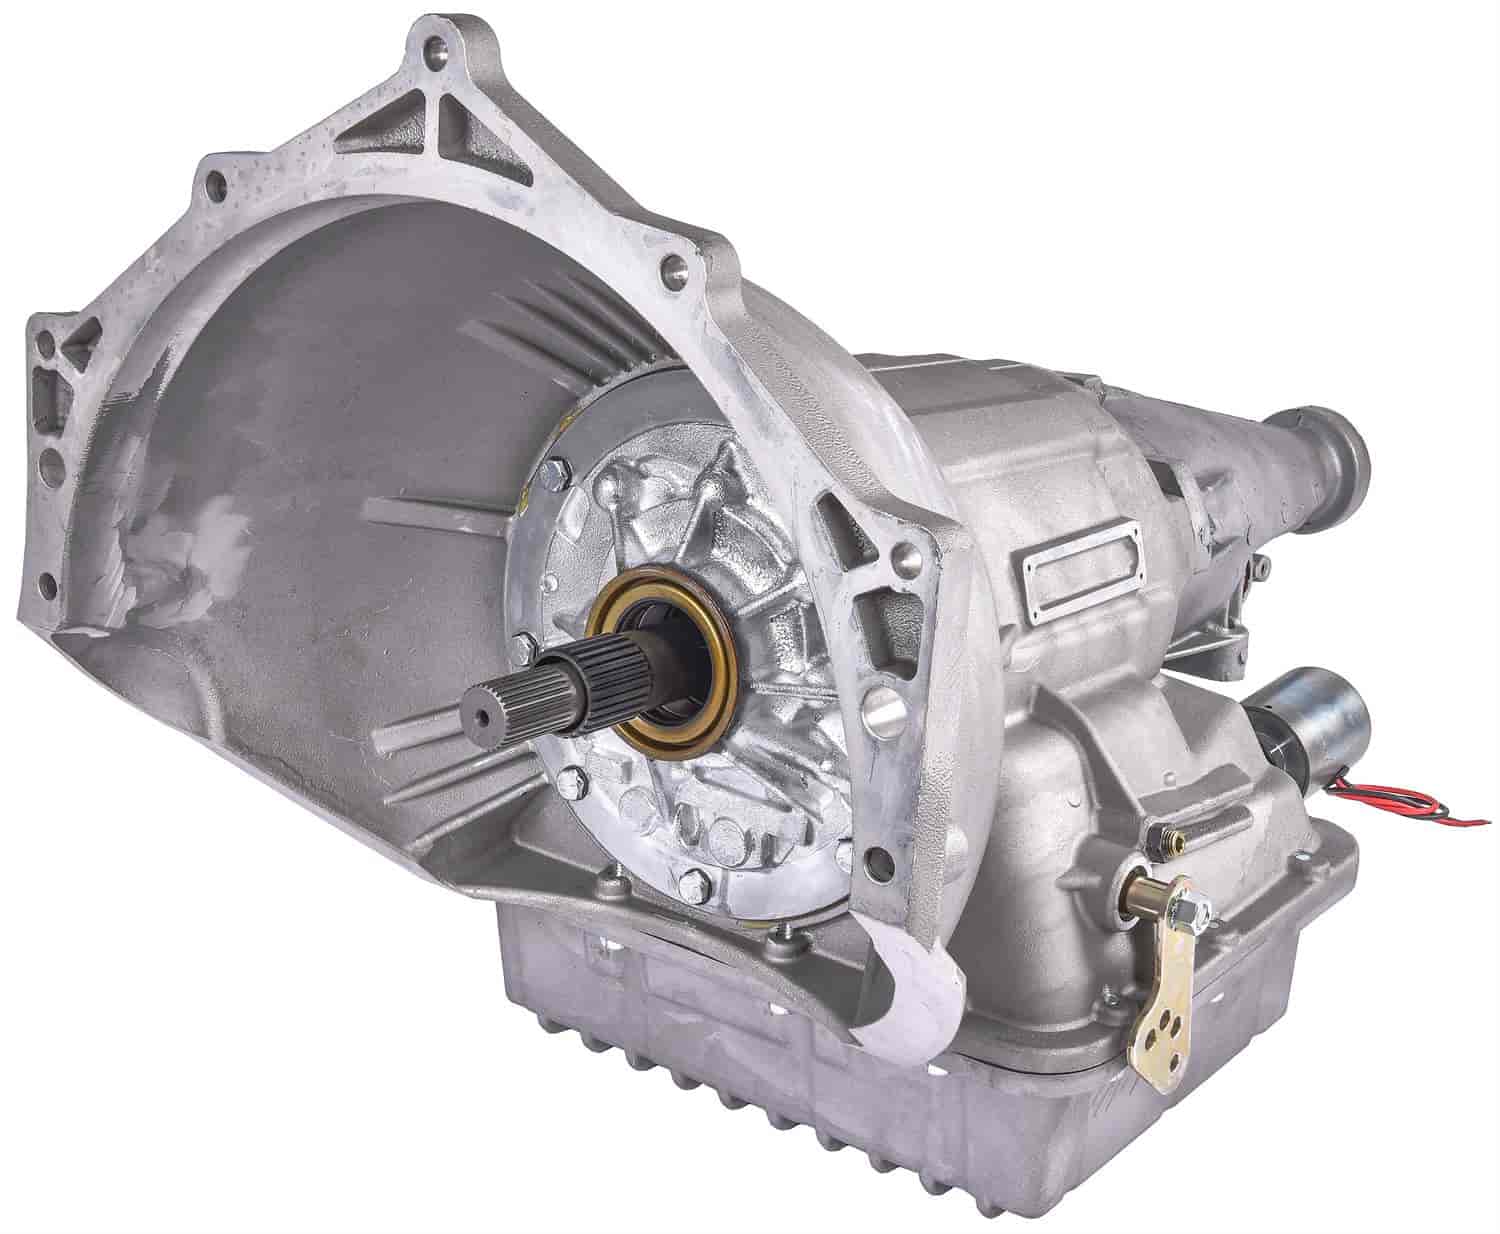 Powerglide 2-speed automatic transmission for Chevy Corvette